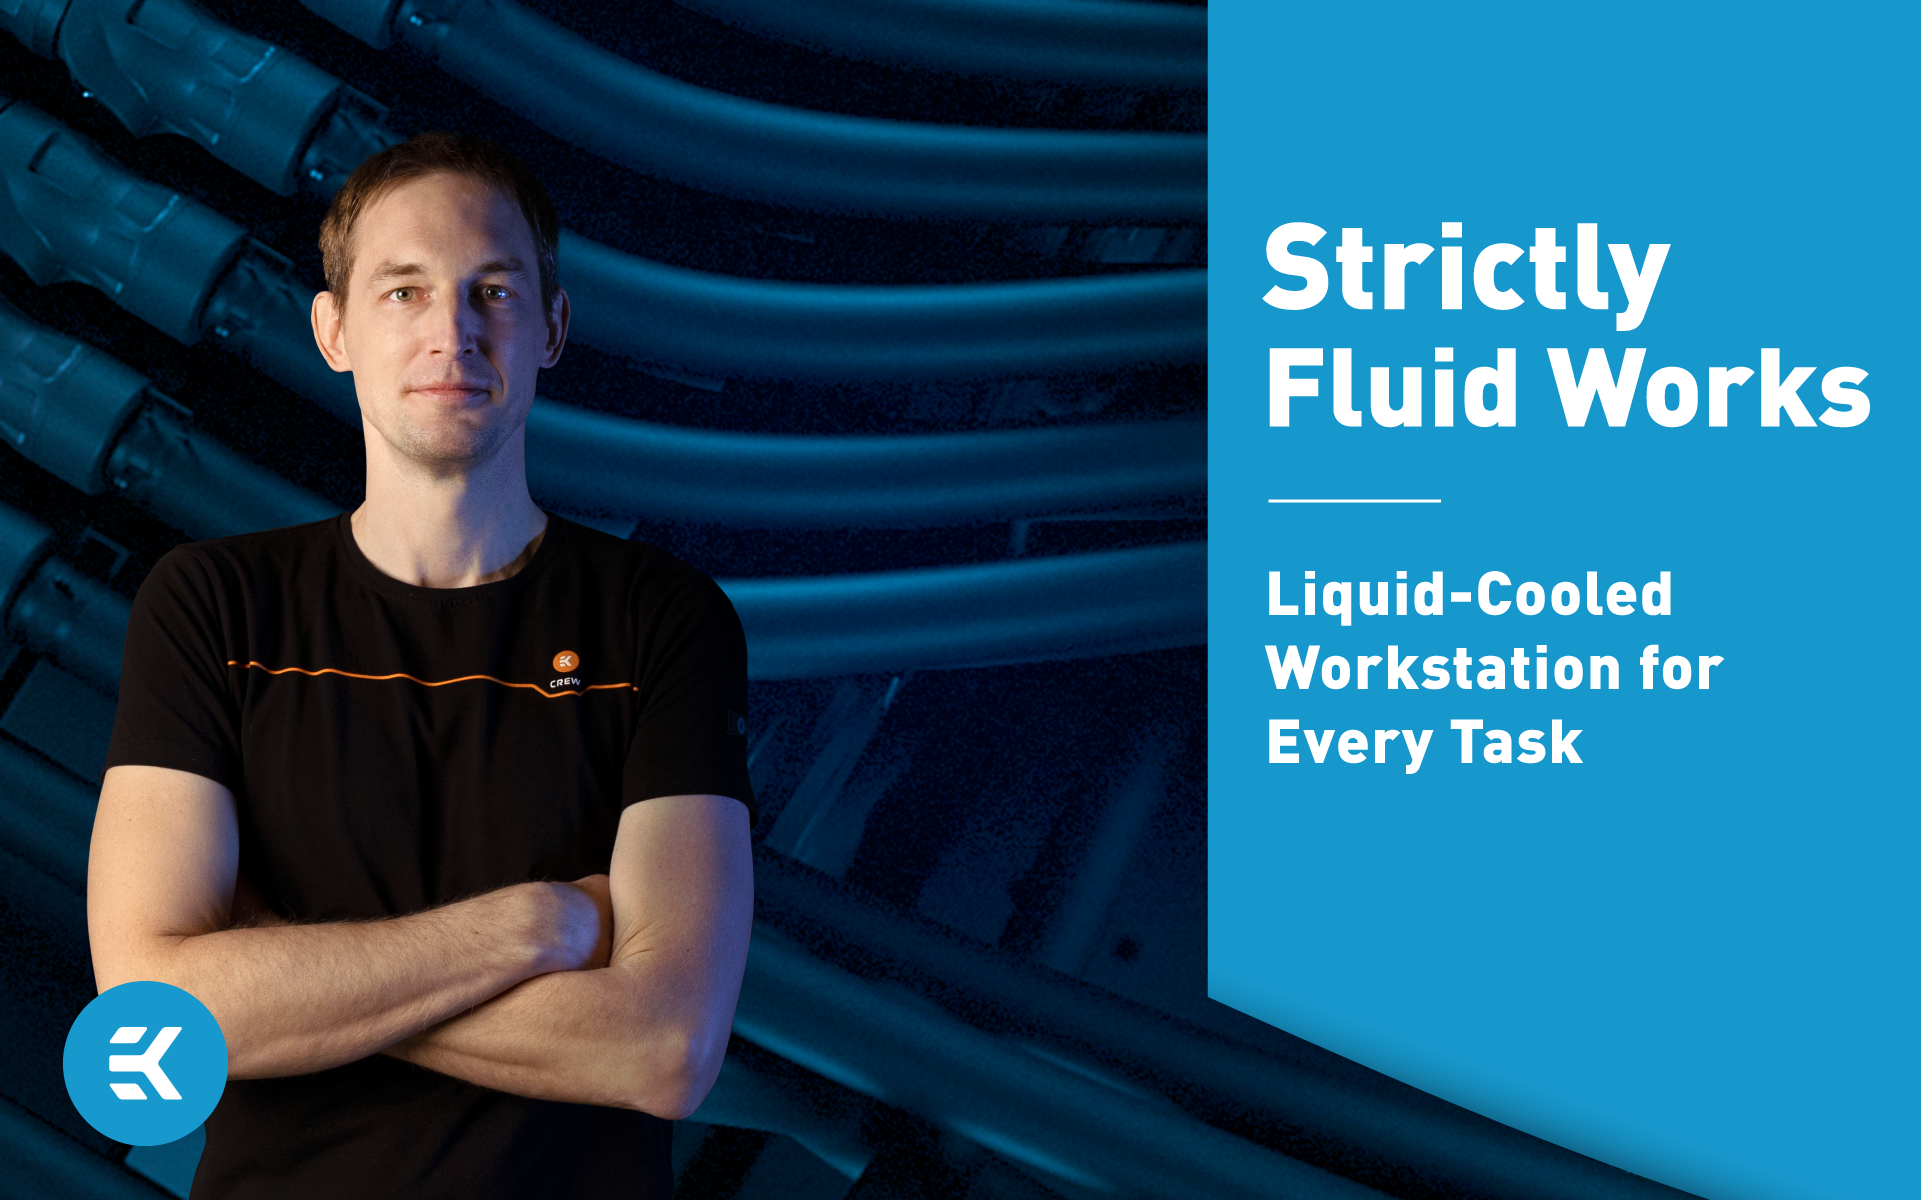 Strictly Fluid Works | Liquid-Cooled Workstation for Every Task